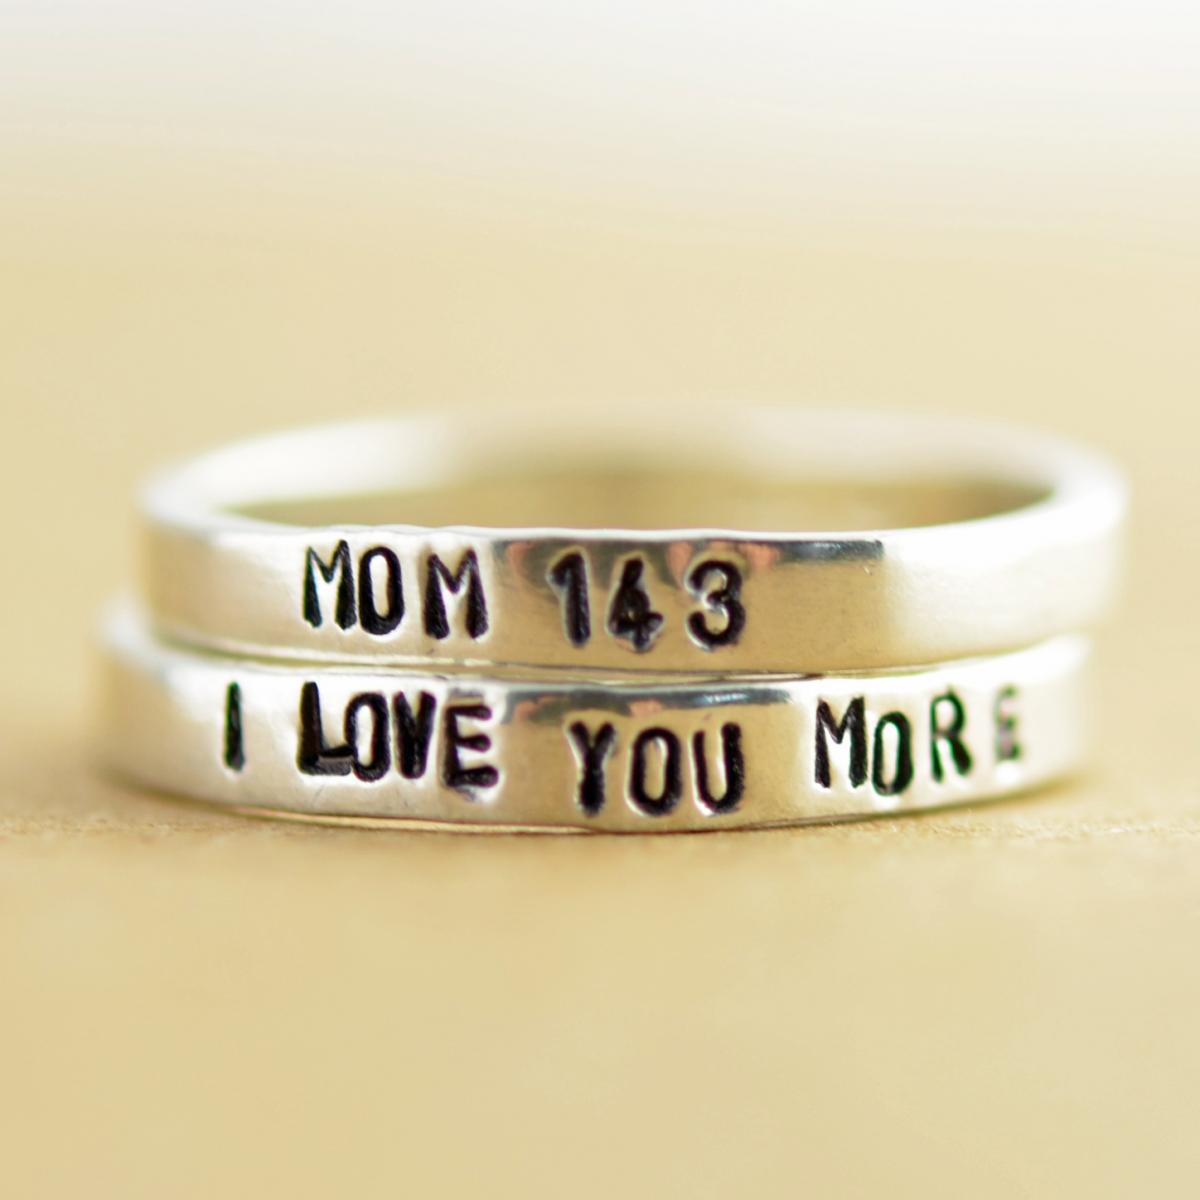 Personalized Rings - Two Stacking Rings - Hand Stamped Ring- Personalized Jewelry- Mothers Day Gift